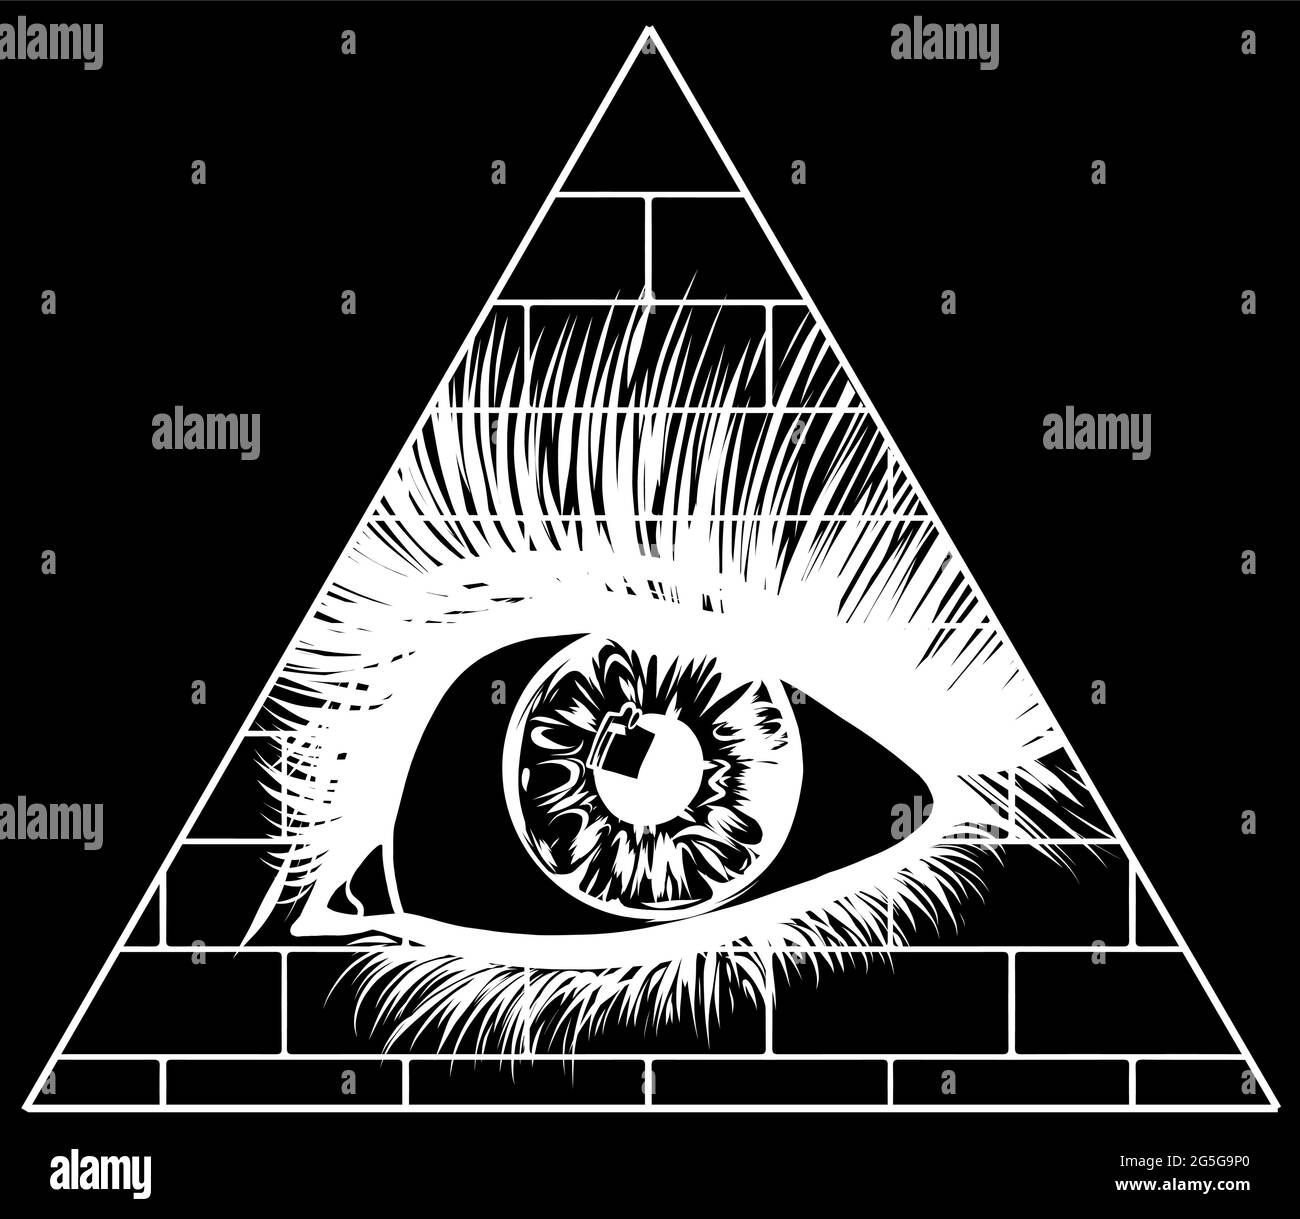 Eye of providence. All seeing eye in the triangle on top of the pyramid masonic symbol. Stock Vector